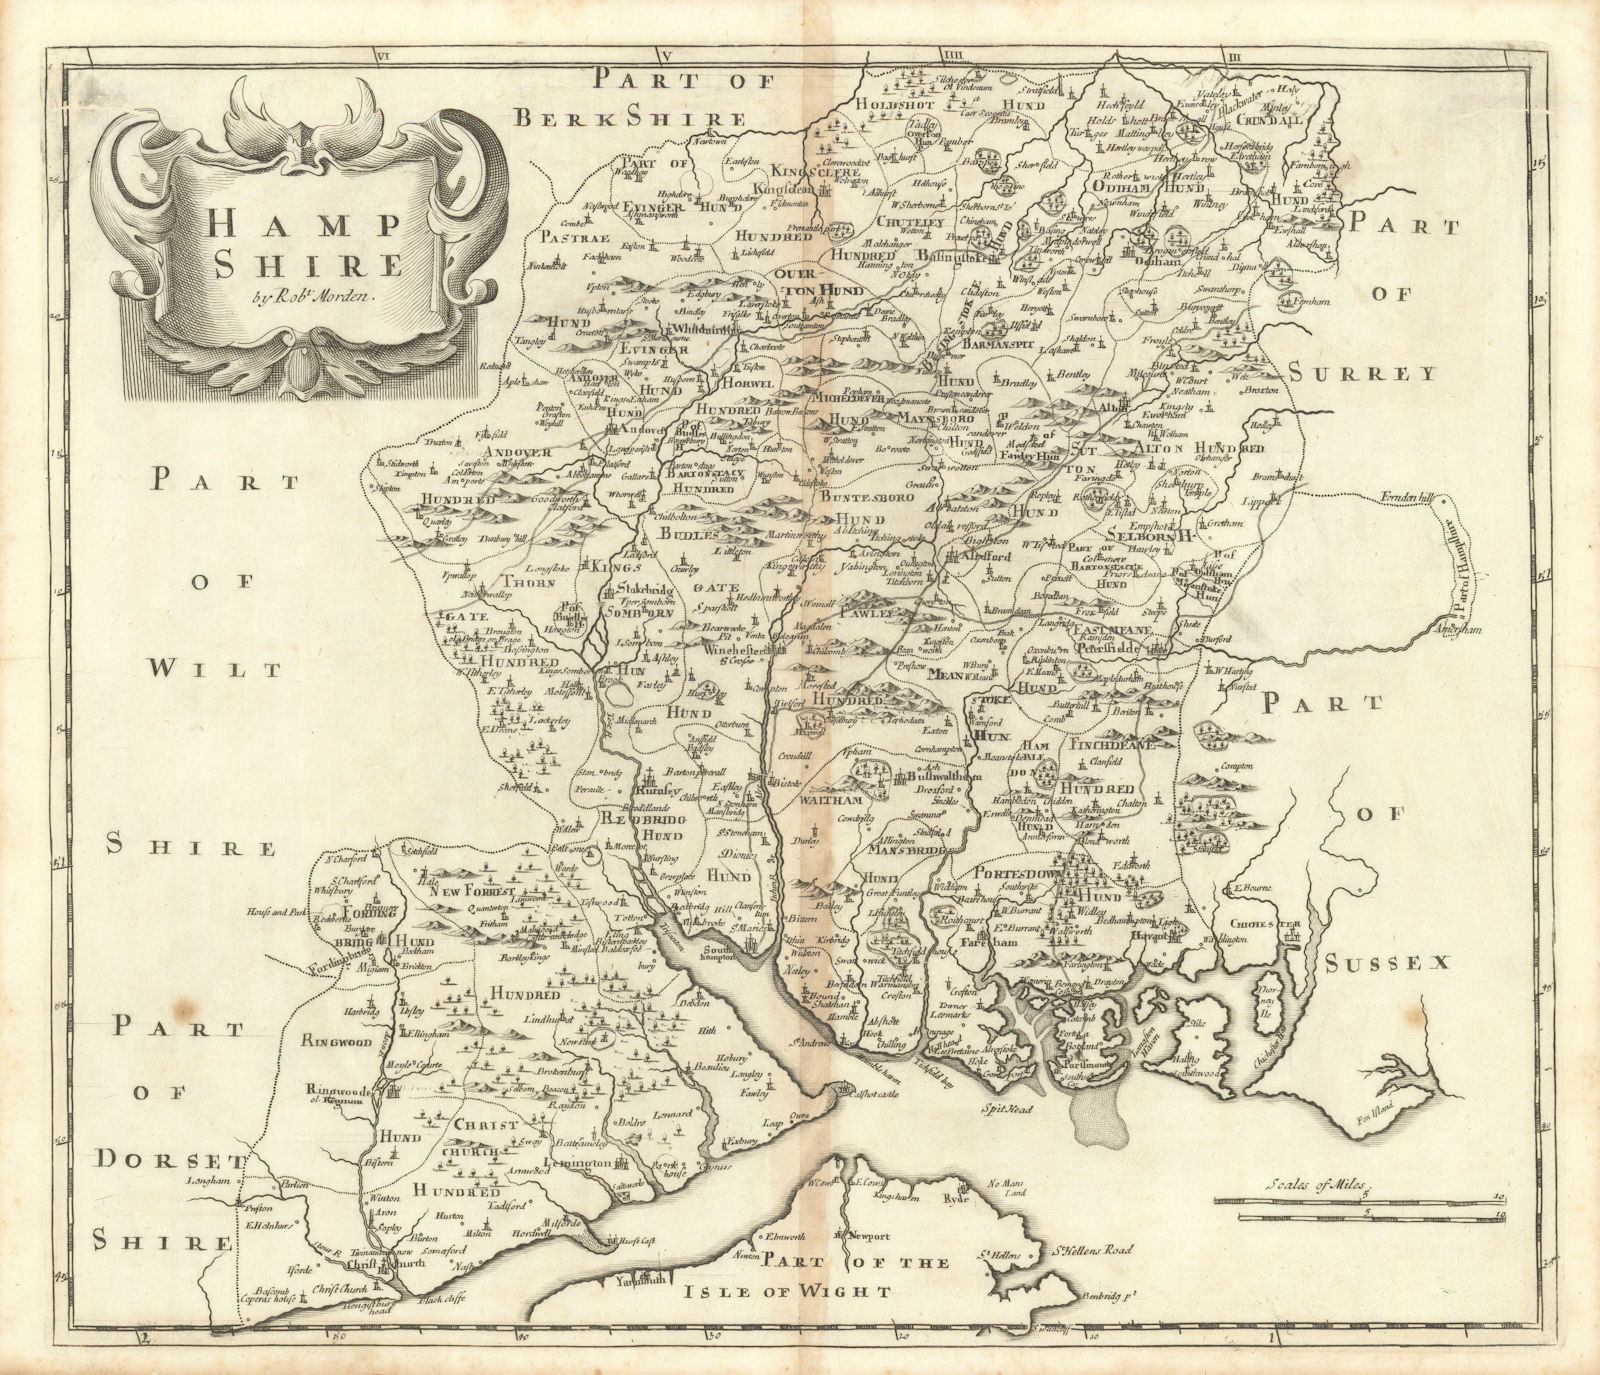 Hampshire. 'HAMP SHIRE' by ROBERT MORDEN from Camden's Britannia 1695 old map